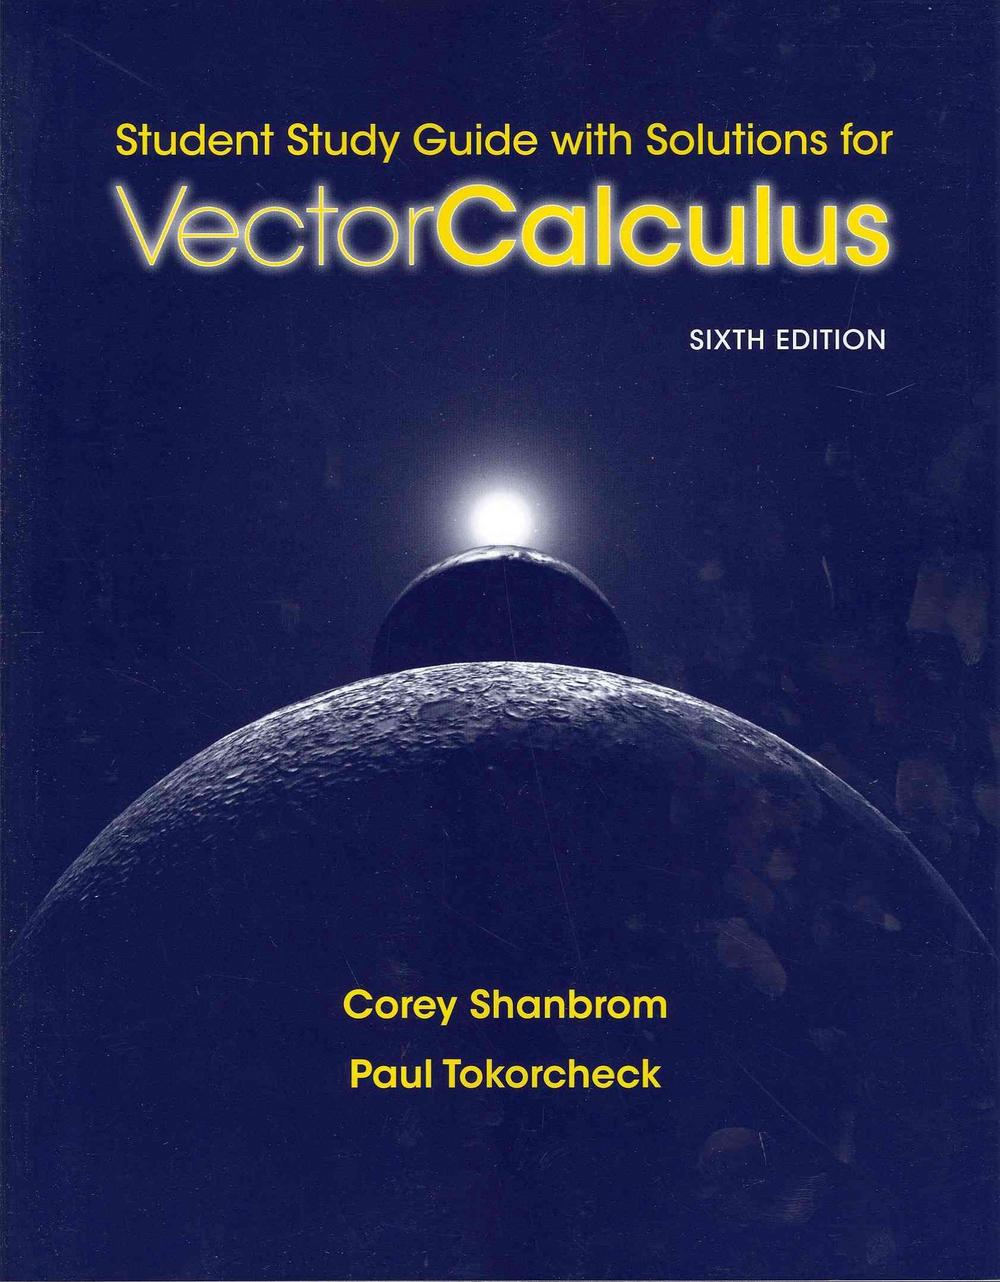 Vector Calculus Tp and Solutions Manual by Jerrold E. Marsden (English